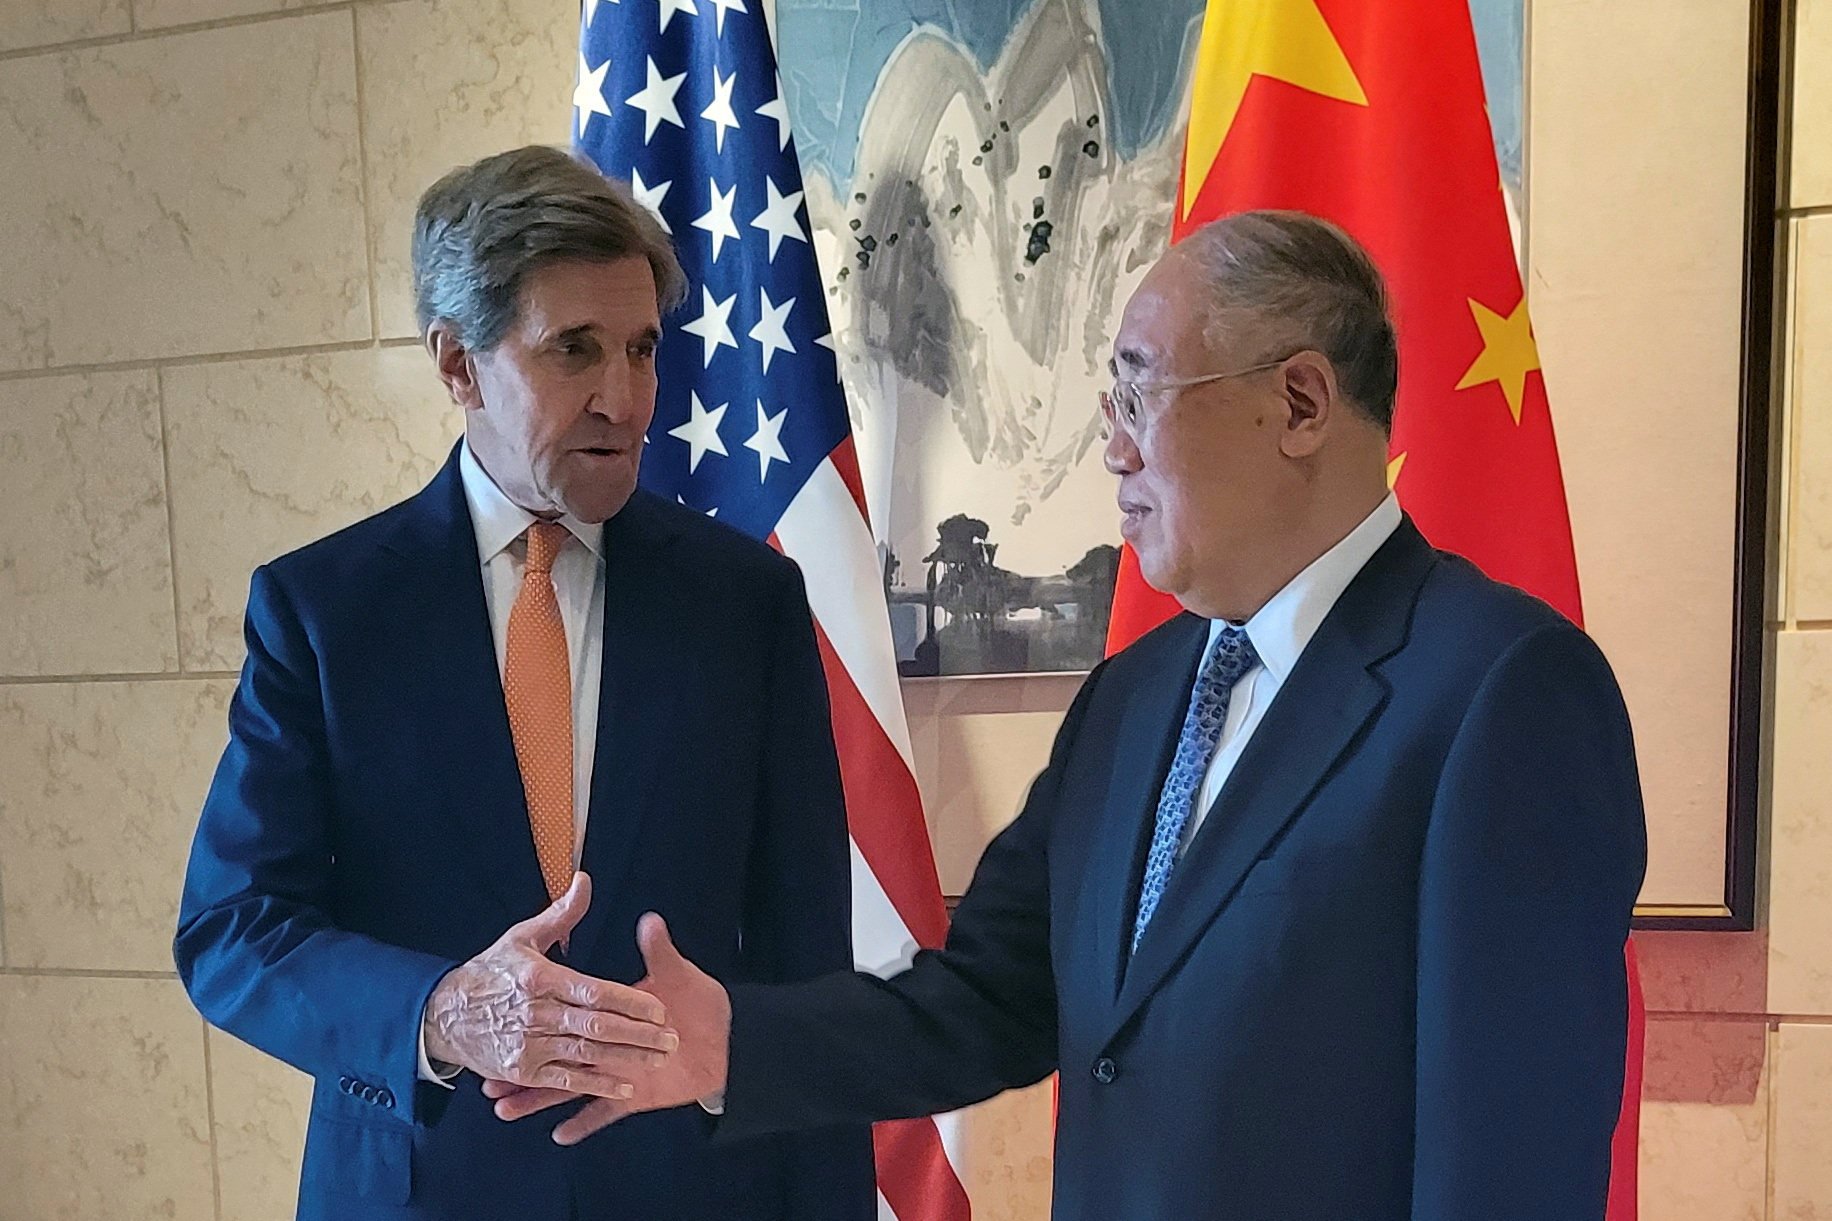 US climate envoy John Kerry shakes hands with his Chinese counterpart Xie Zhenhua before a meeting in Beijing on July 17. Photo: Reuters